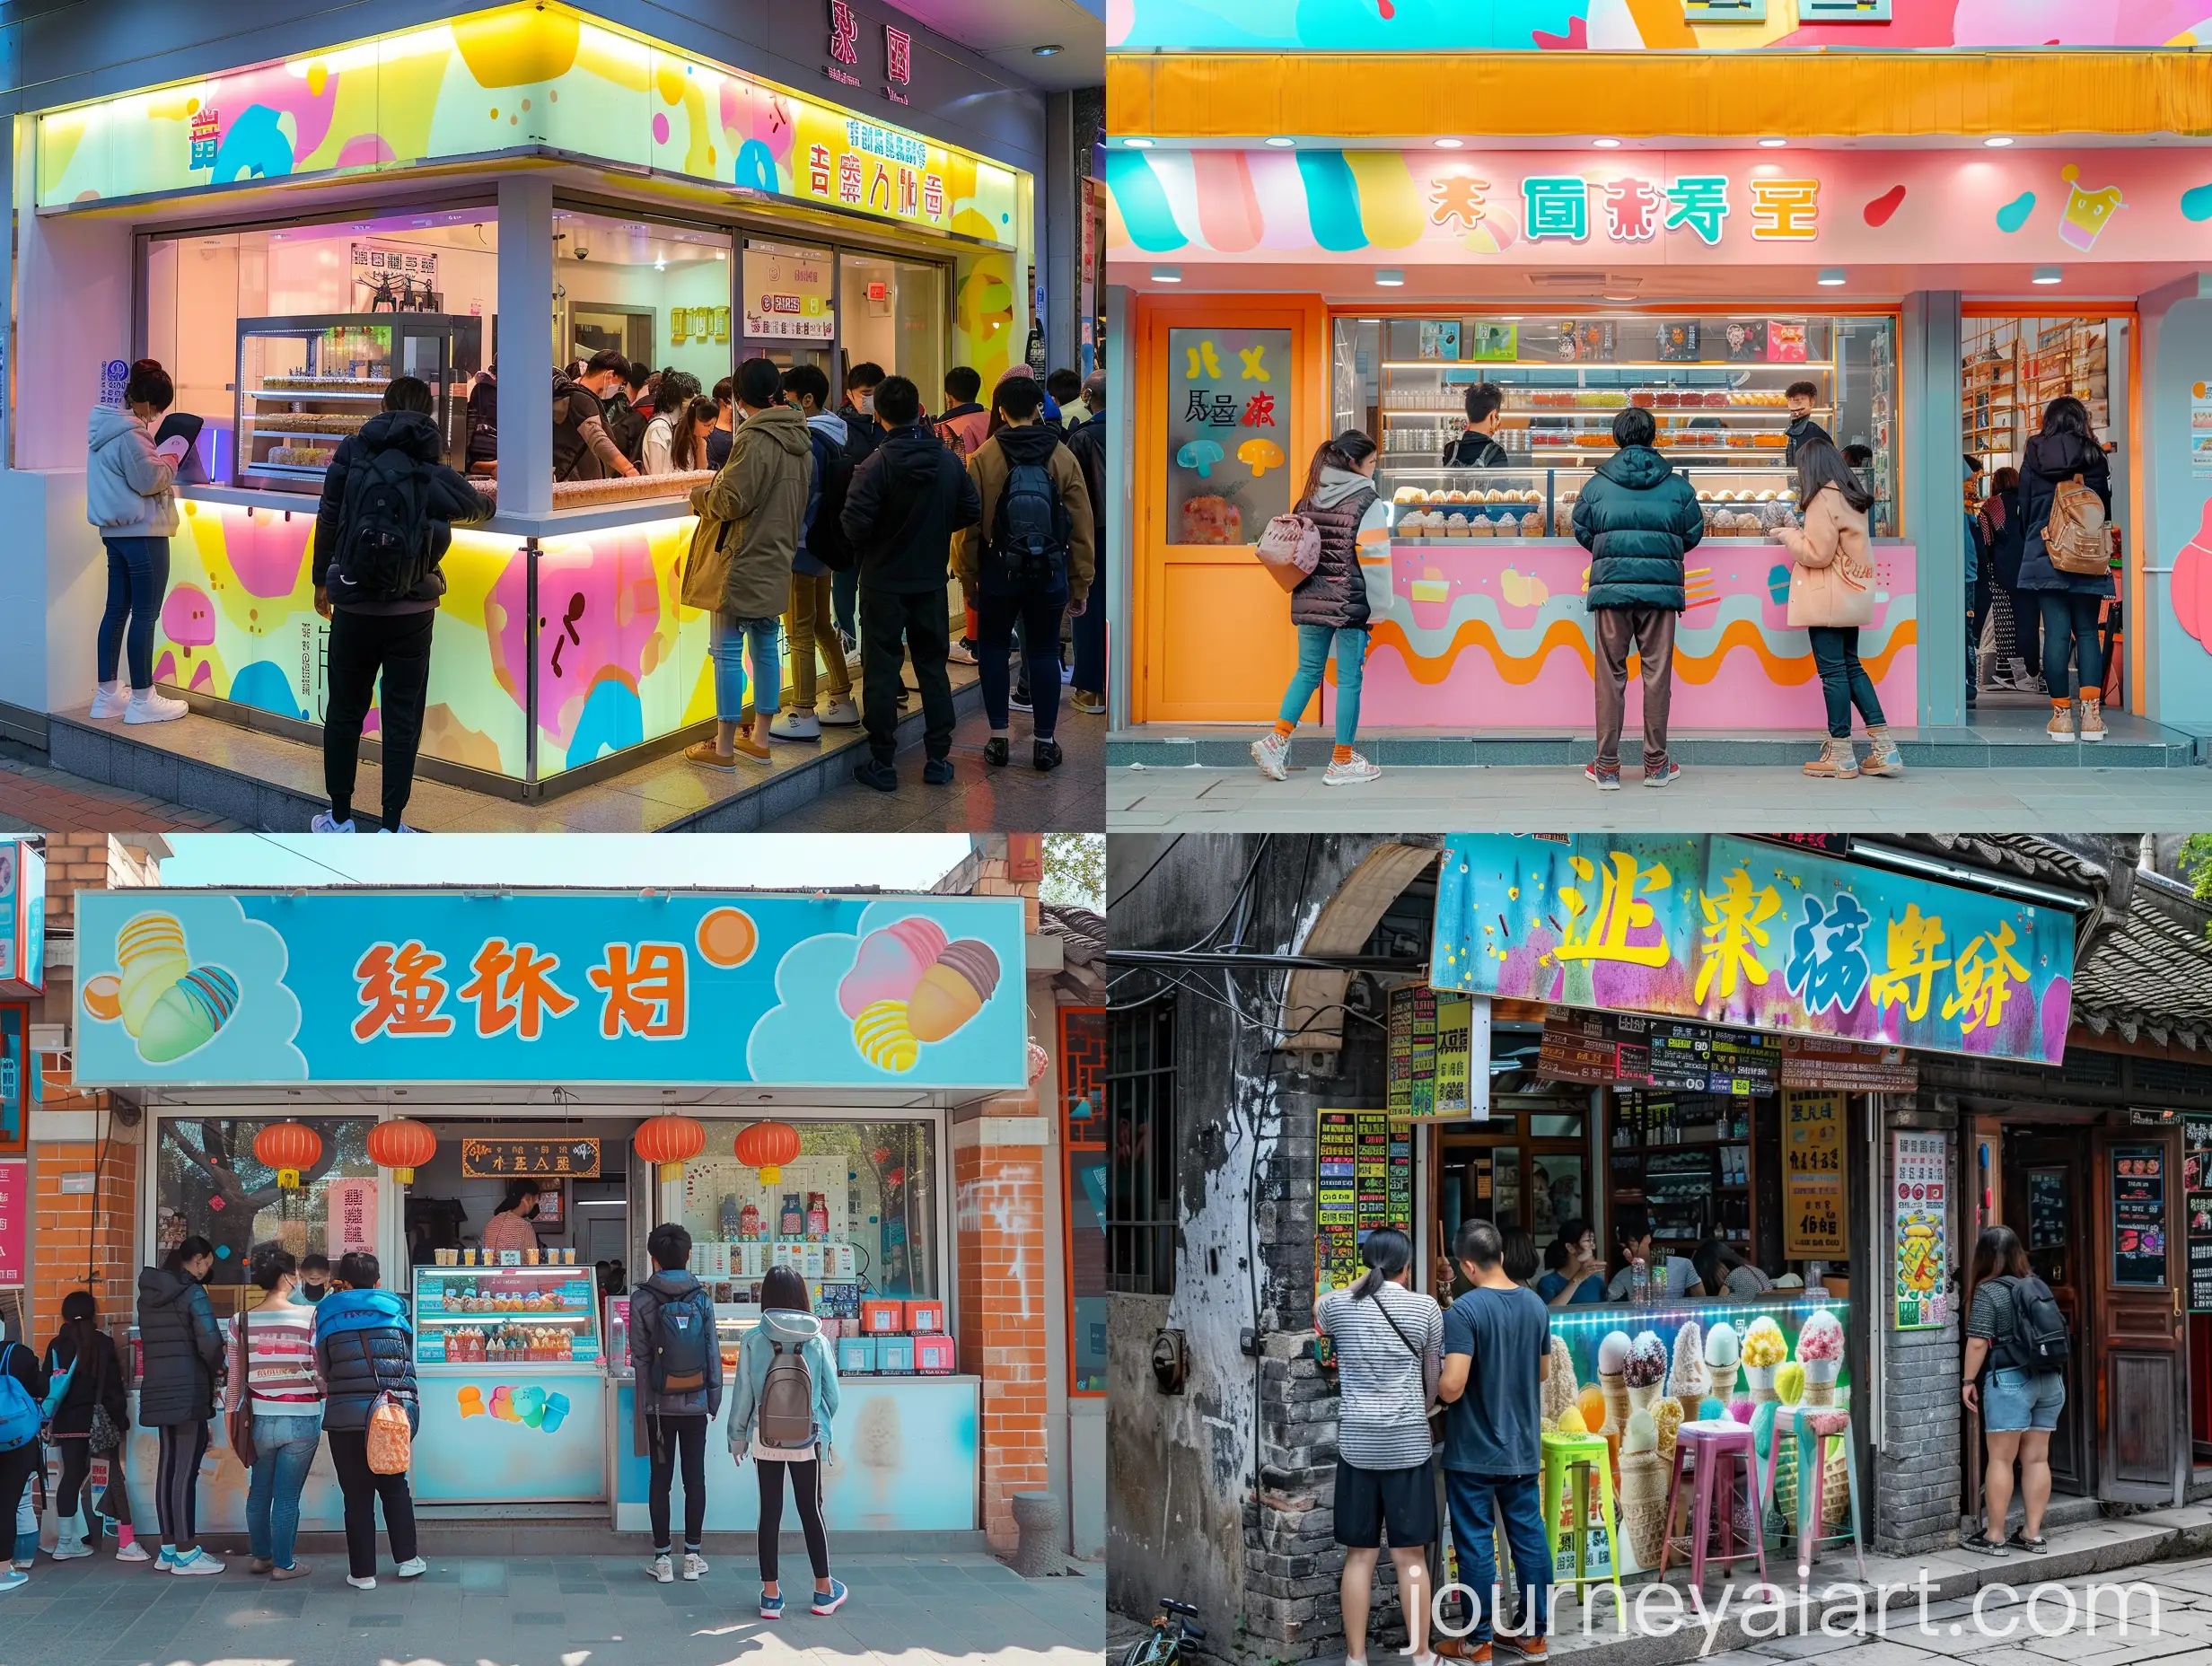 Colorful-Ice-Cream-Shop-in-China-with-People-Waiting-in-Line